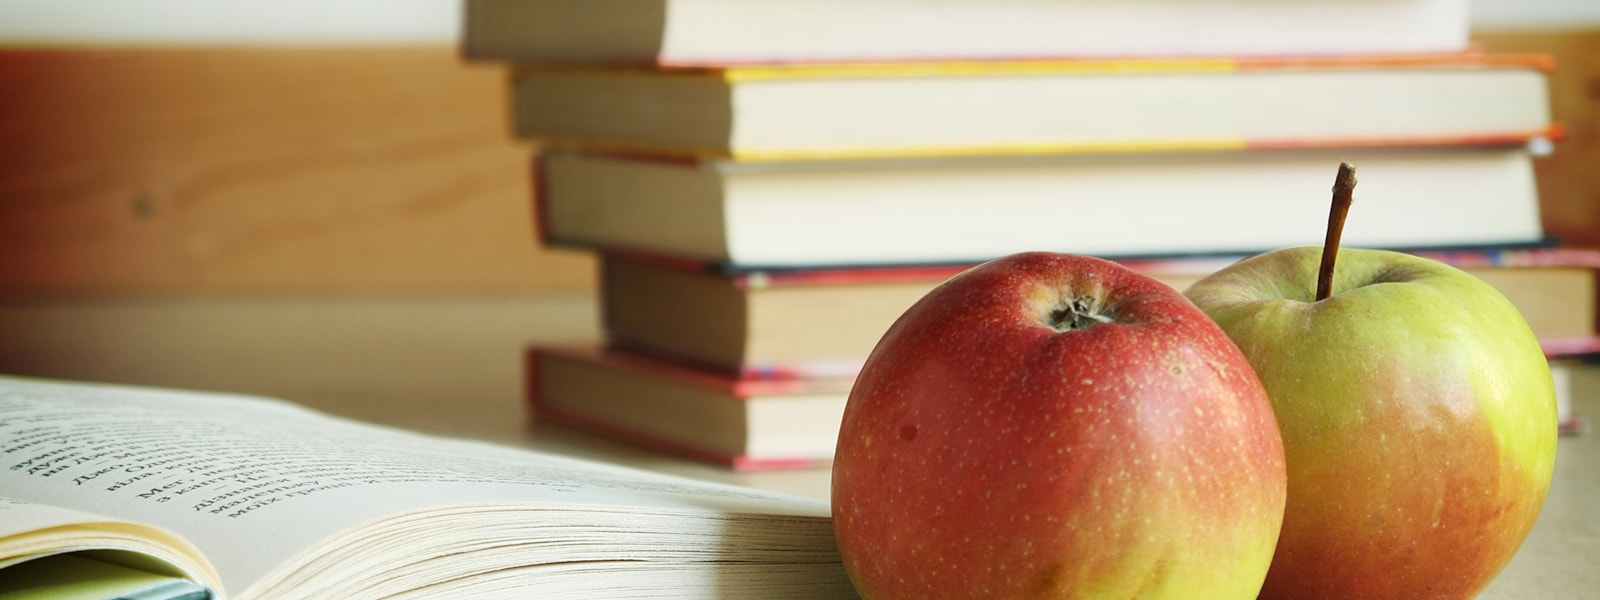 apples and books